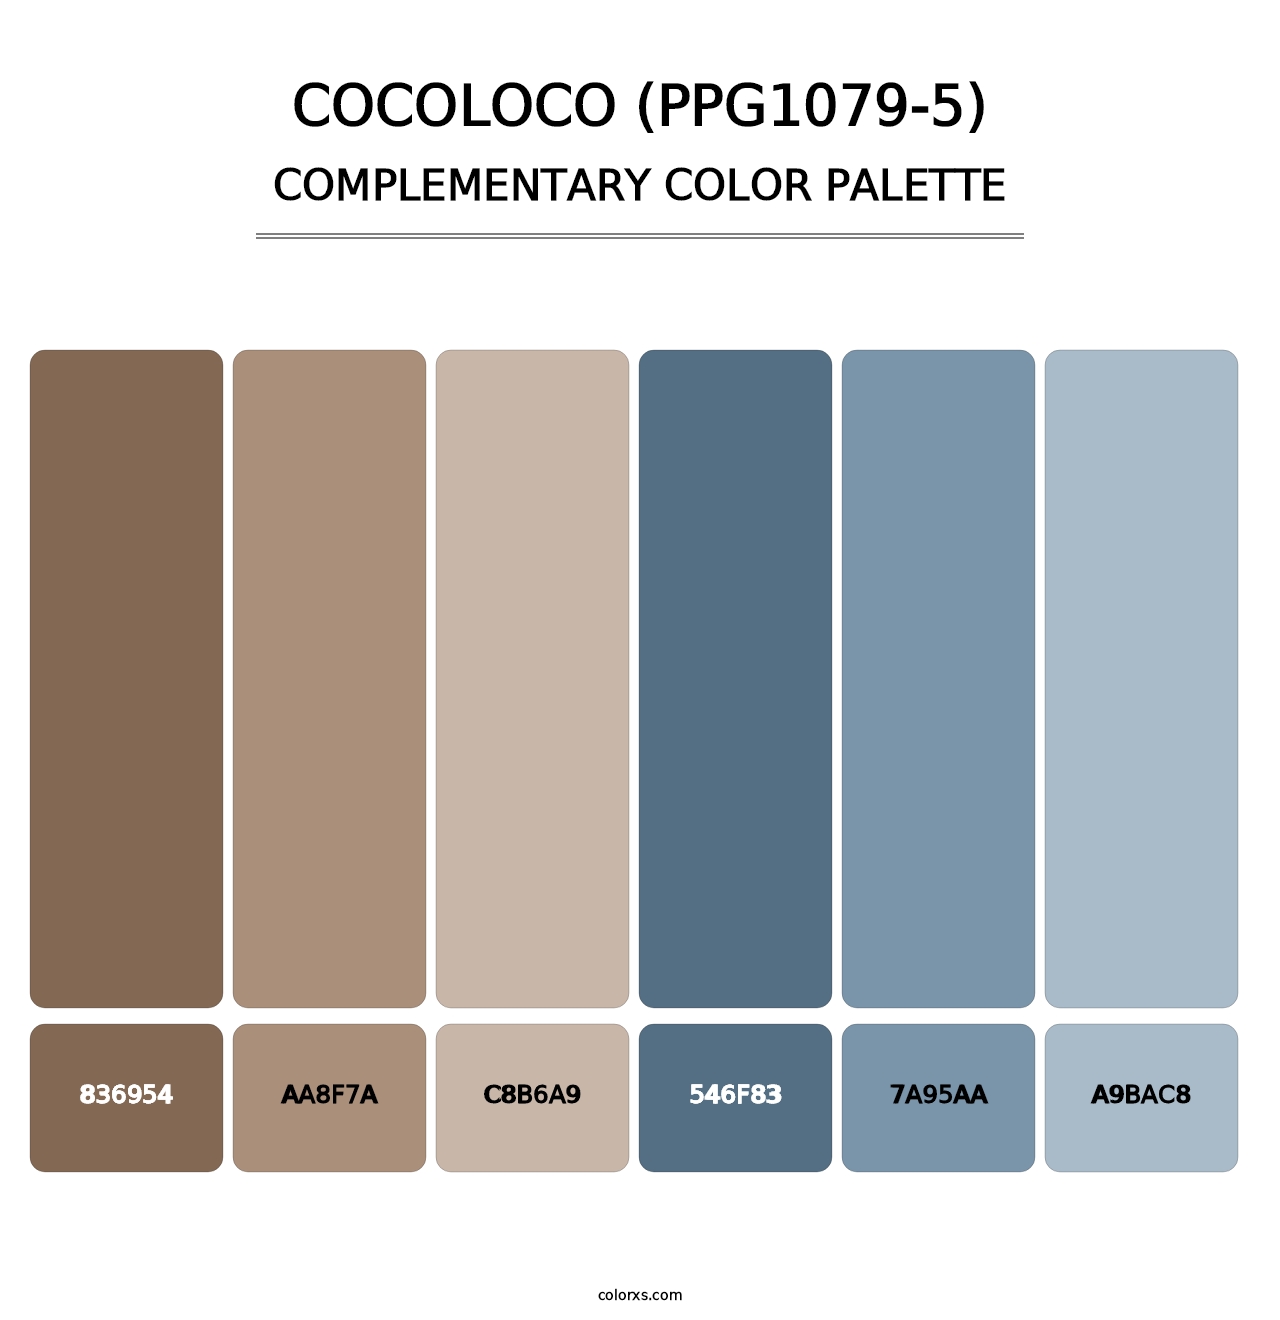 Cocoloco (PPG1079-5) - Complementary Color Palette